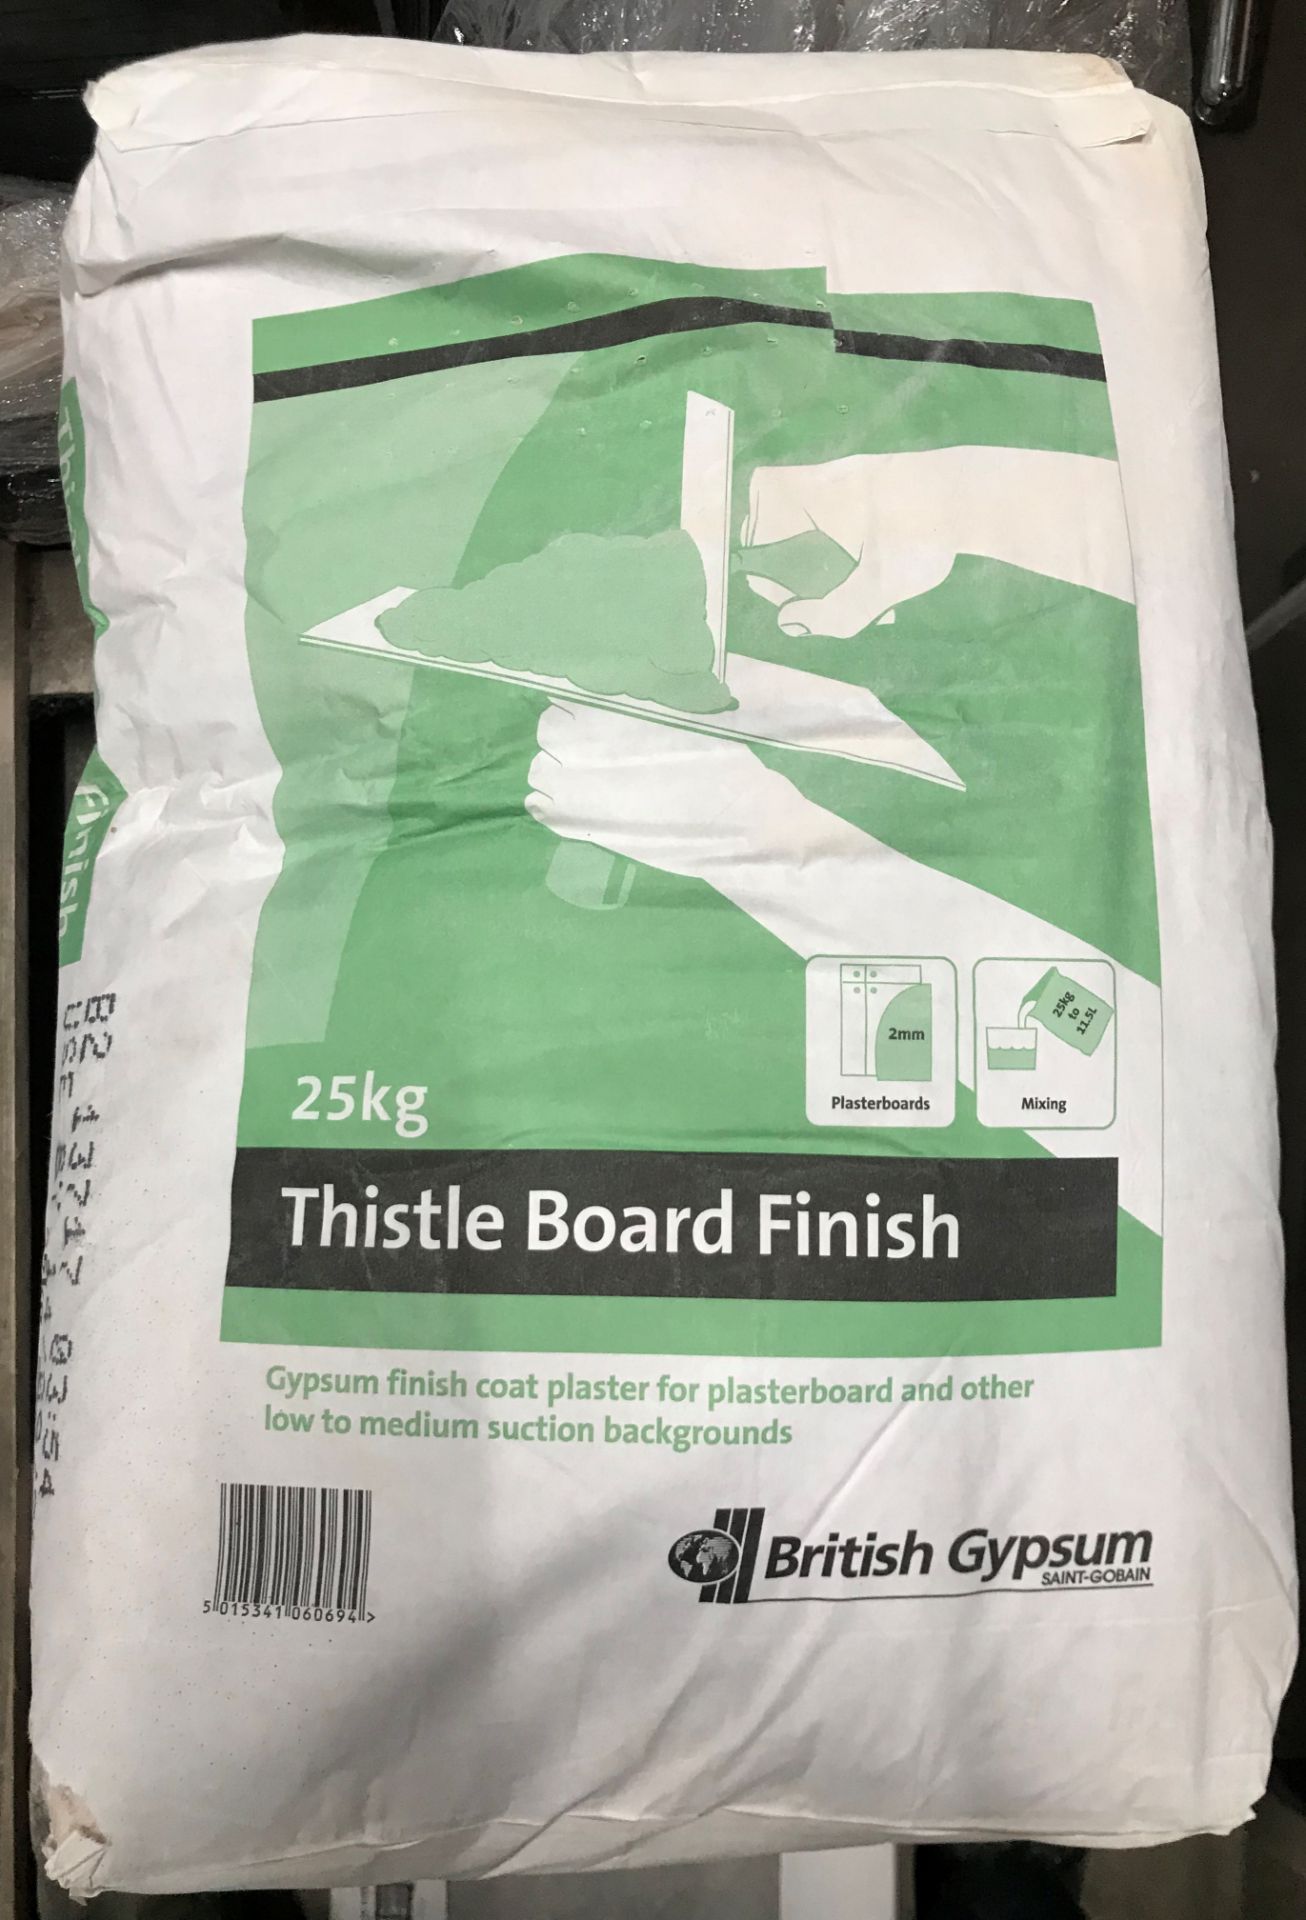 4 x 25KG Bags of British Gypsum Thistle Board Finish Cement - EXP 14/09/2017